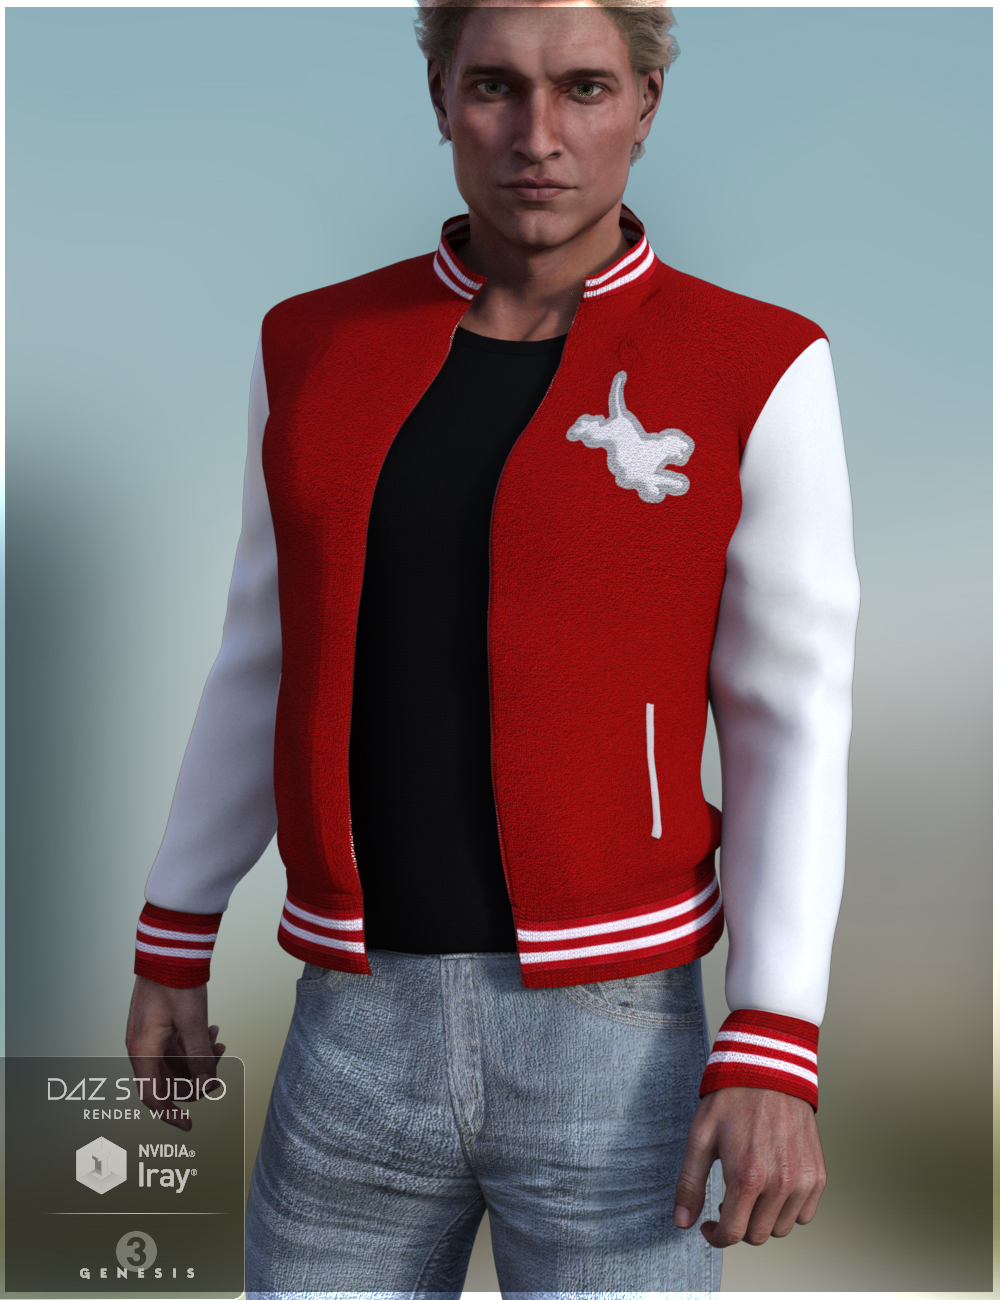 Chilled Out Outfit for Genesis 3 Male(s) by: Nikisatez, 3D Models by Daz 3D